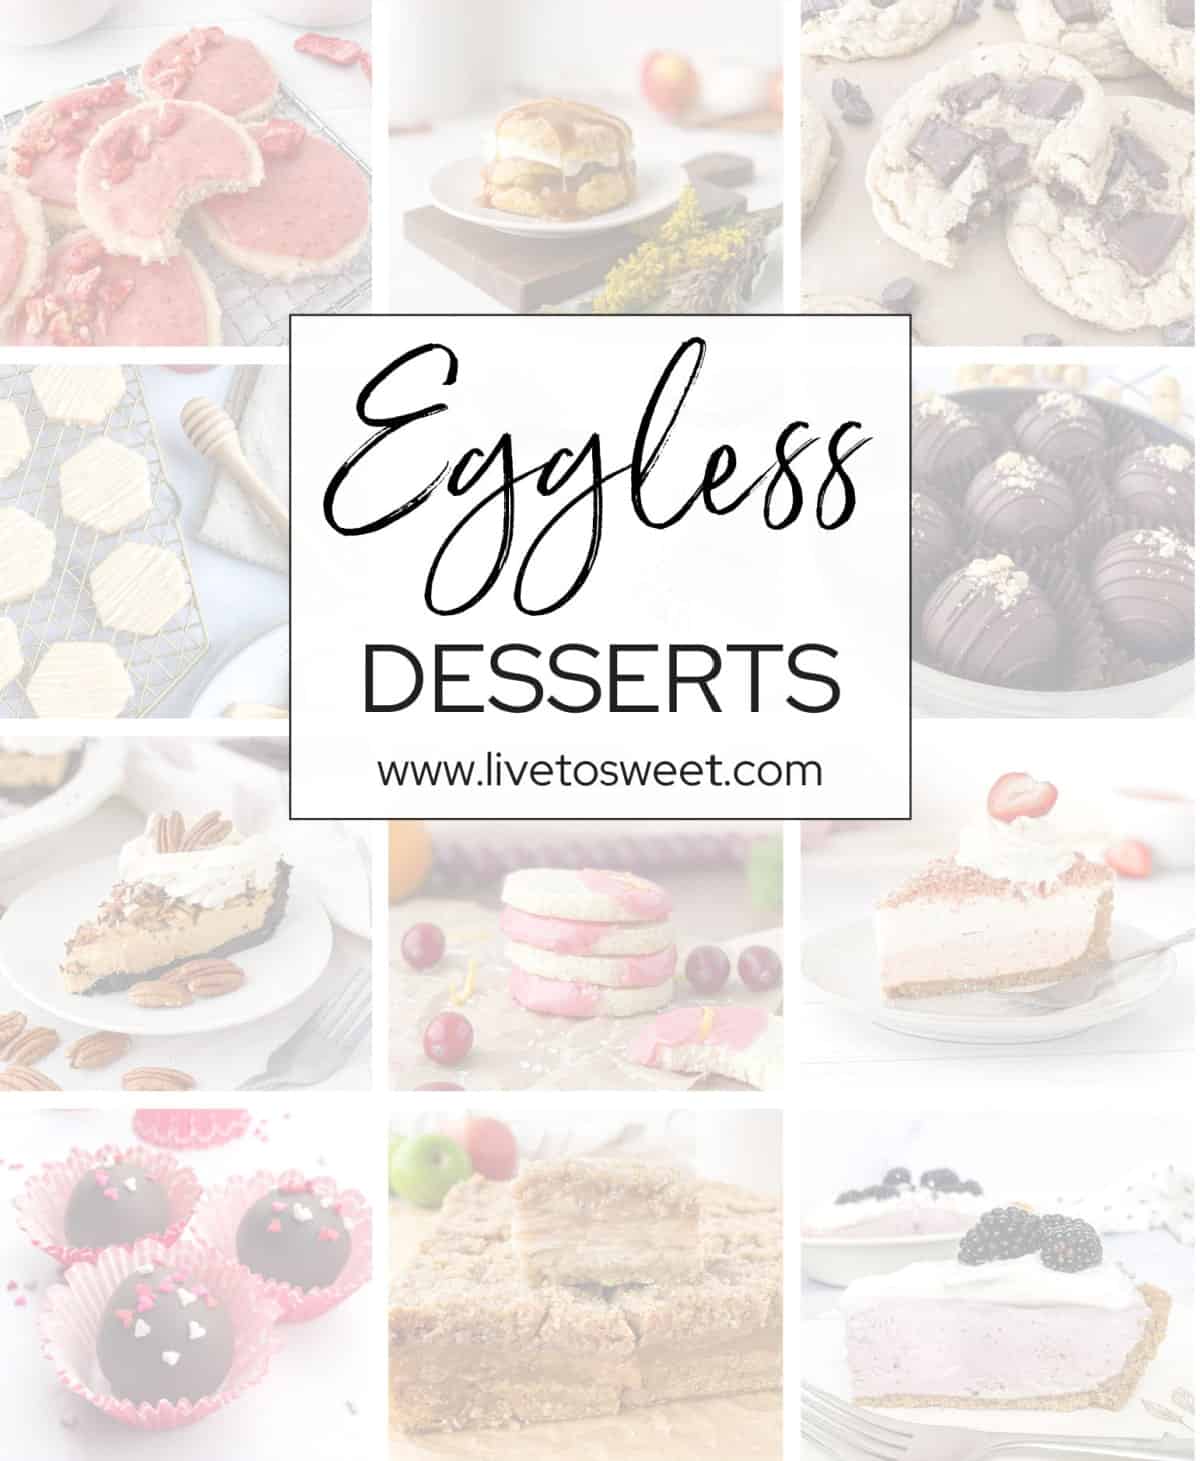 Eggless Desserts collage.